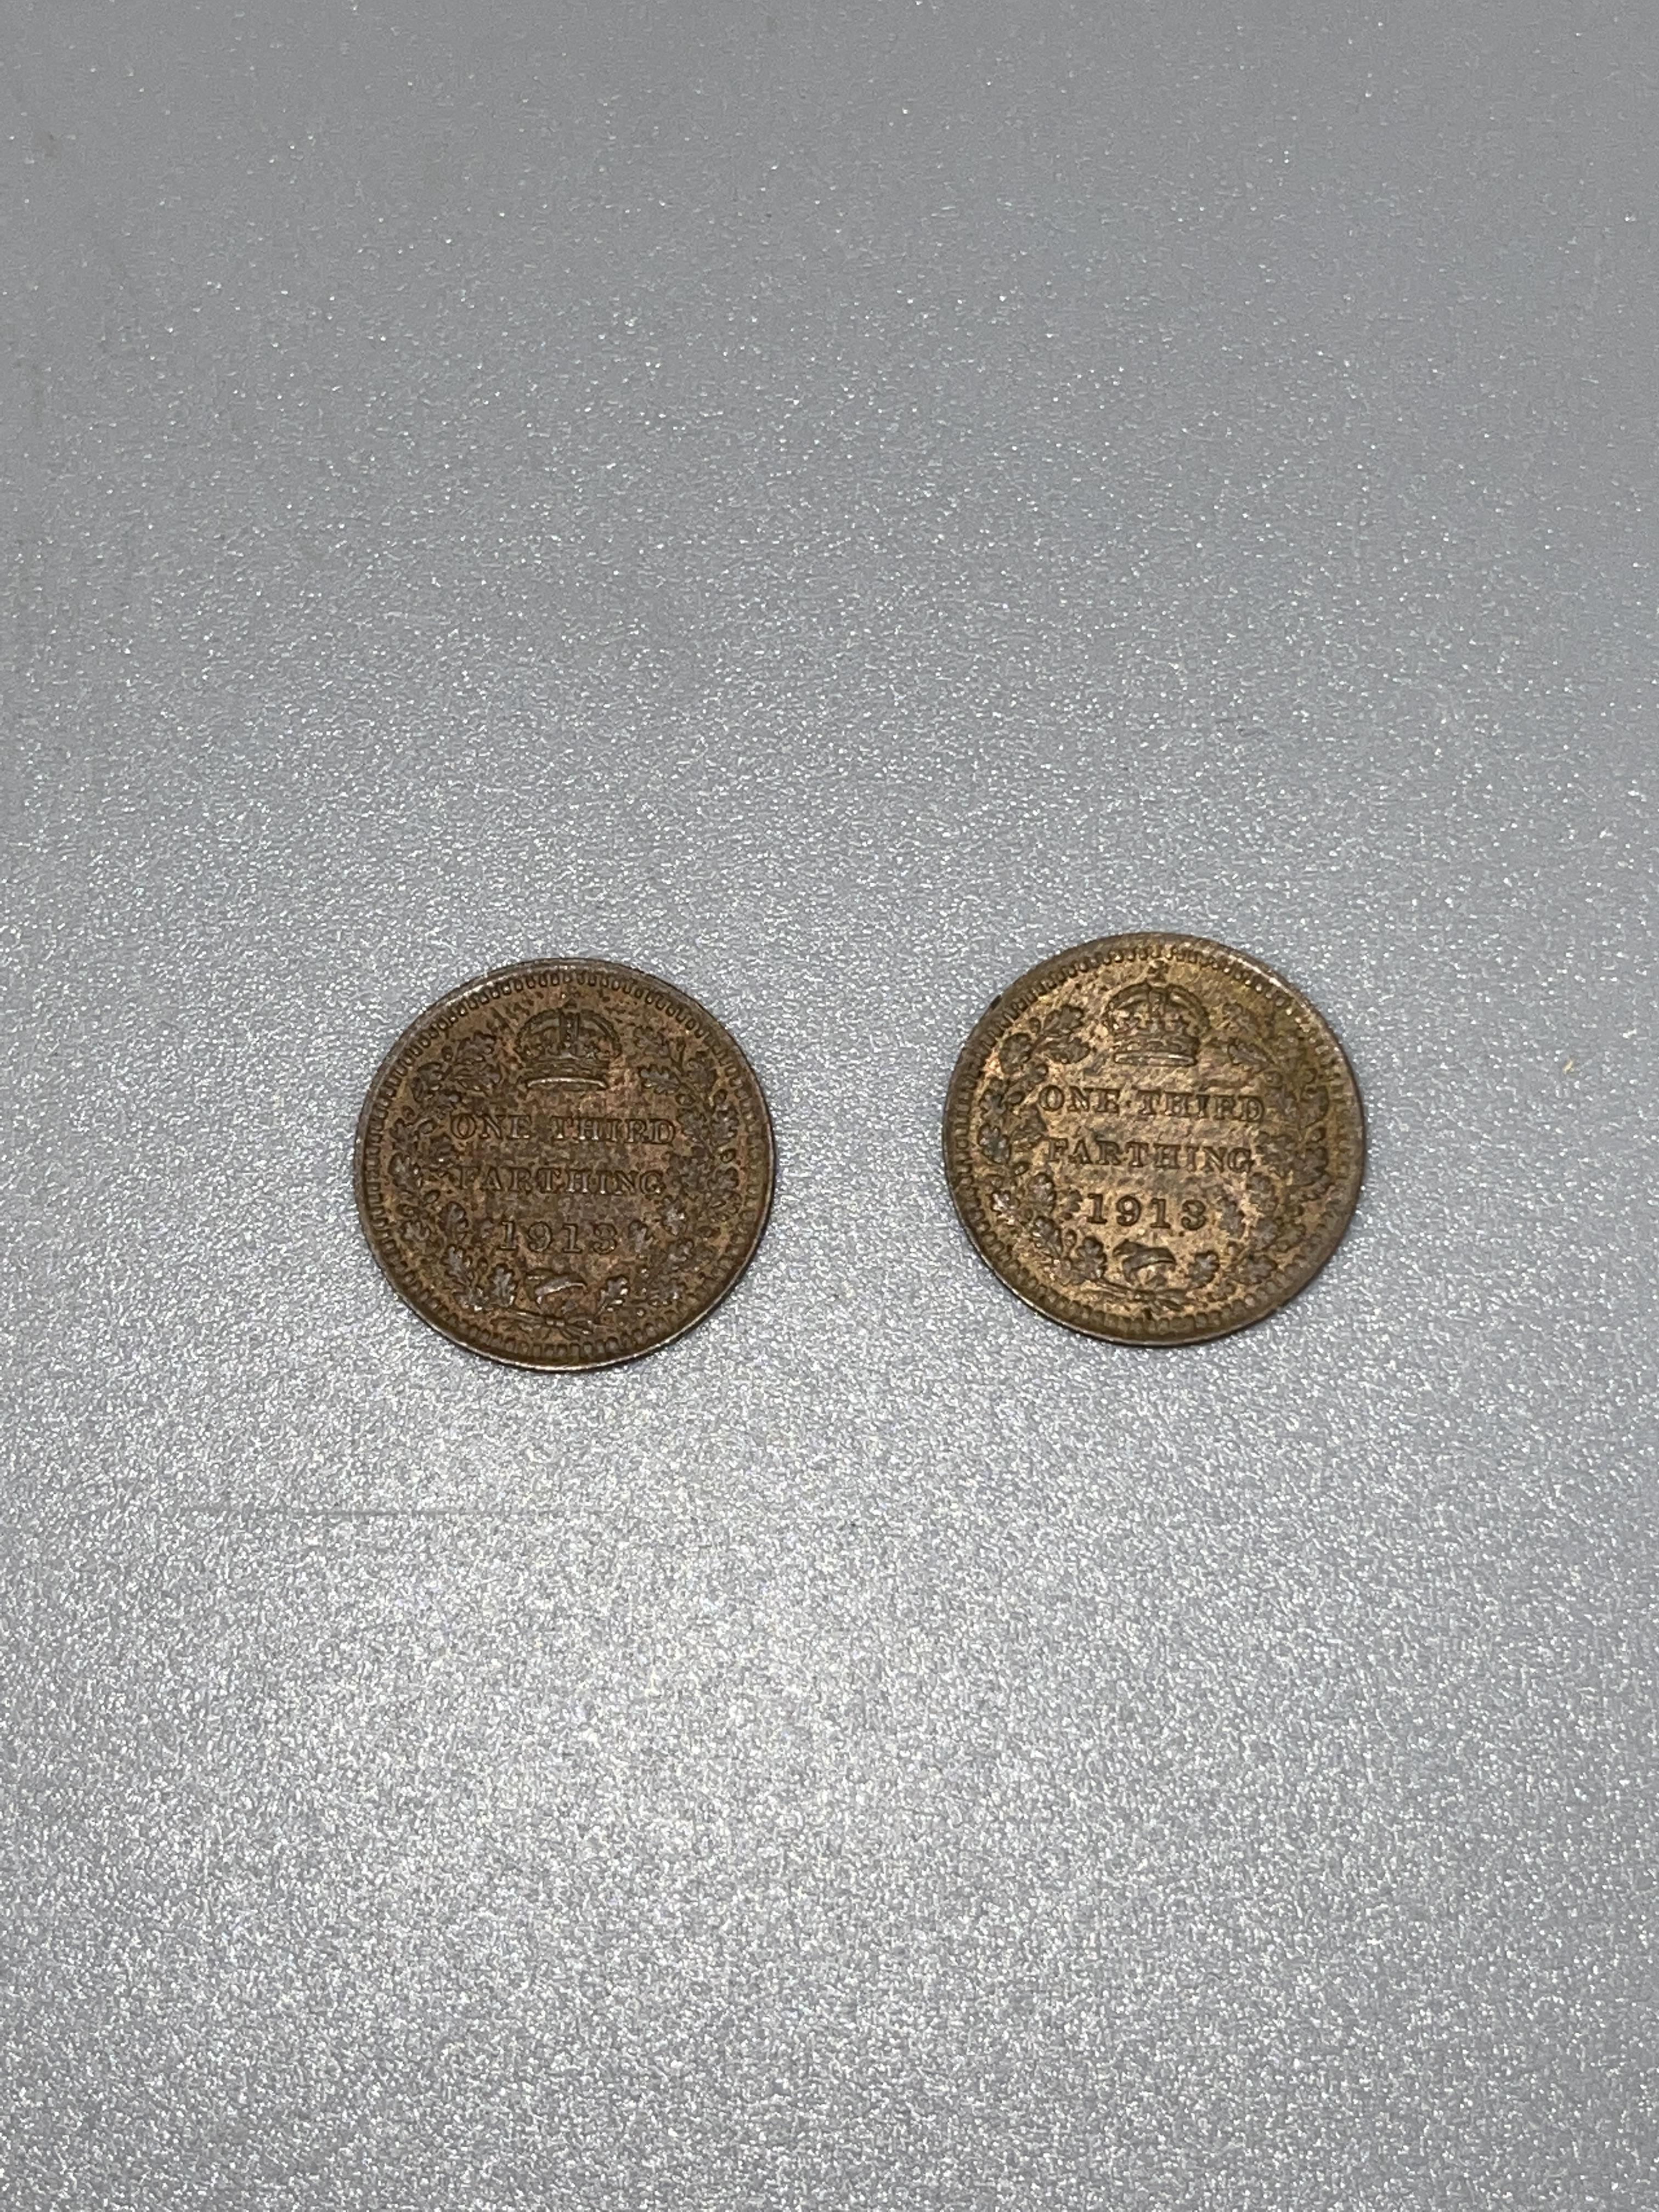 High grade Half and third farthings and model coin - Image 3 of 6